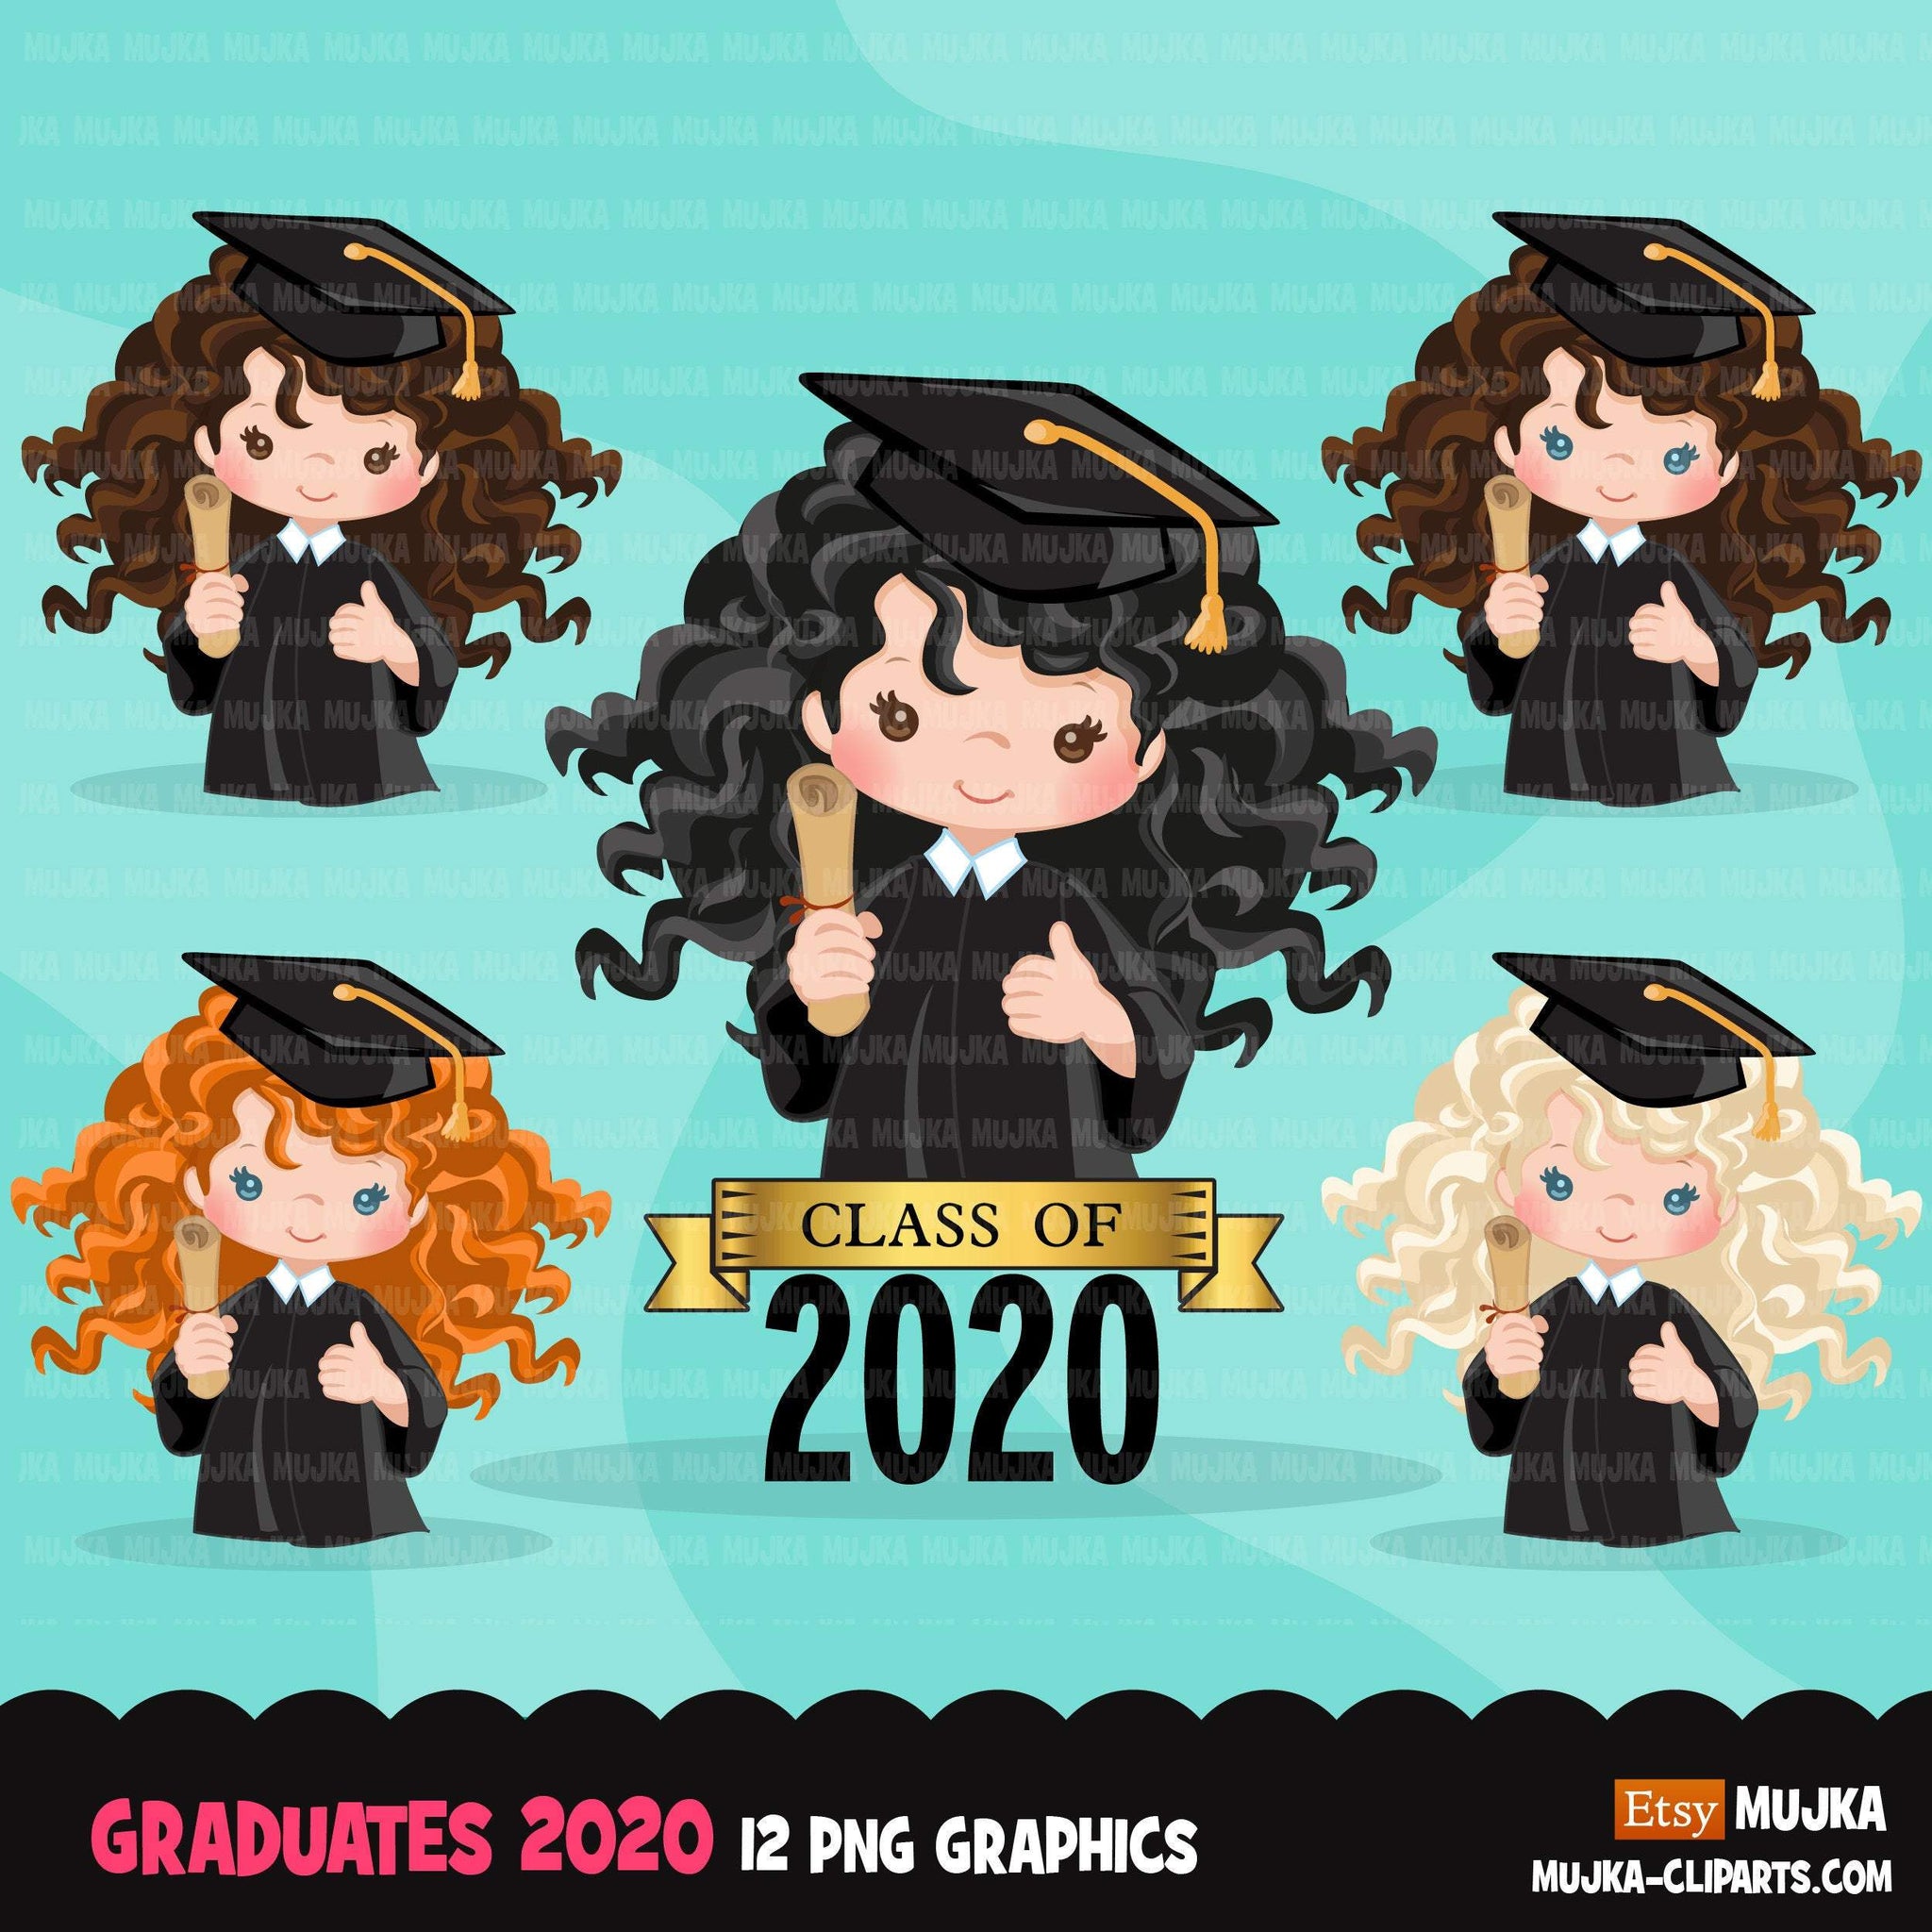 Graduation Clipart, 2020 graduate girls with cape and scroll, school, student class of 2020 gold banner graphics, PNG clip art